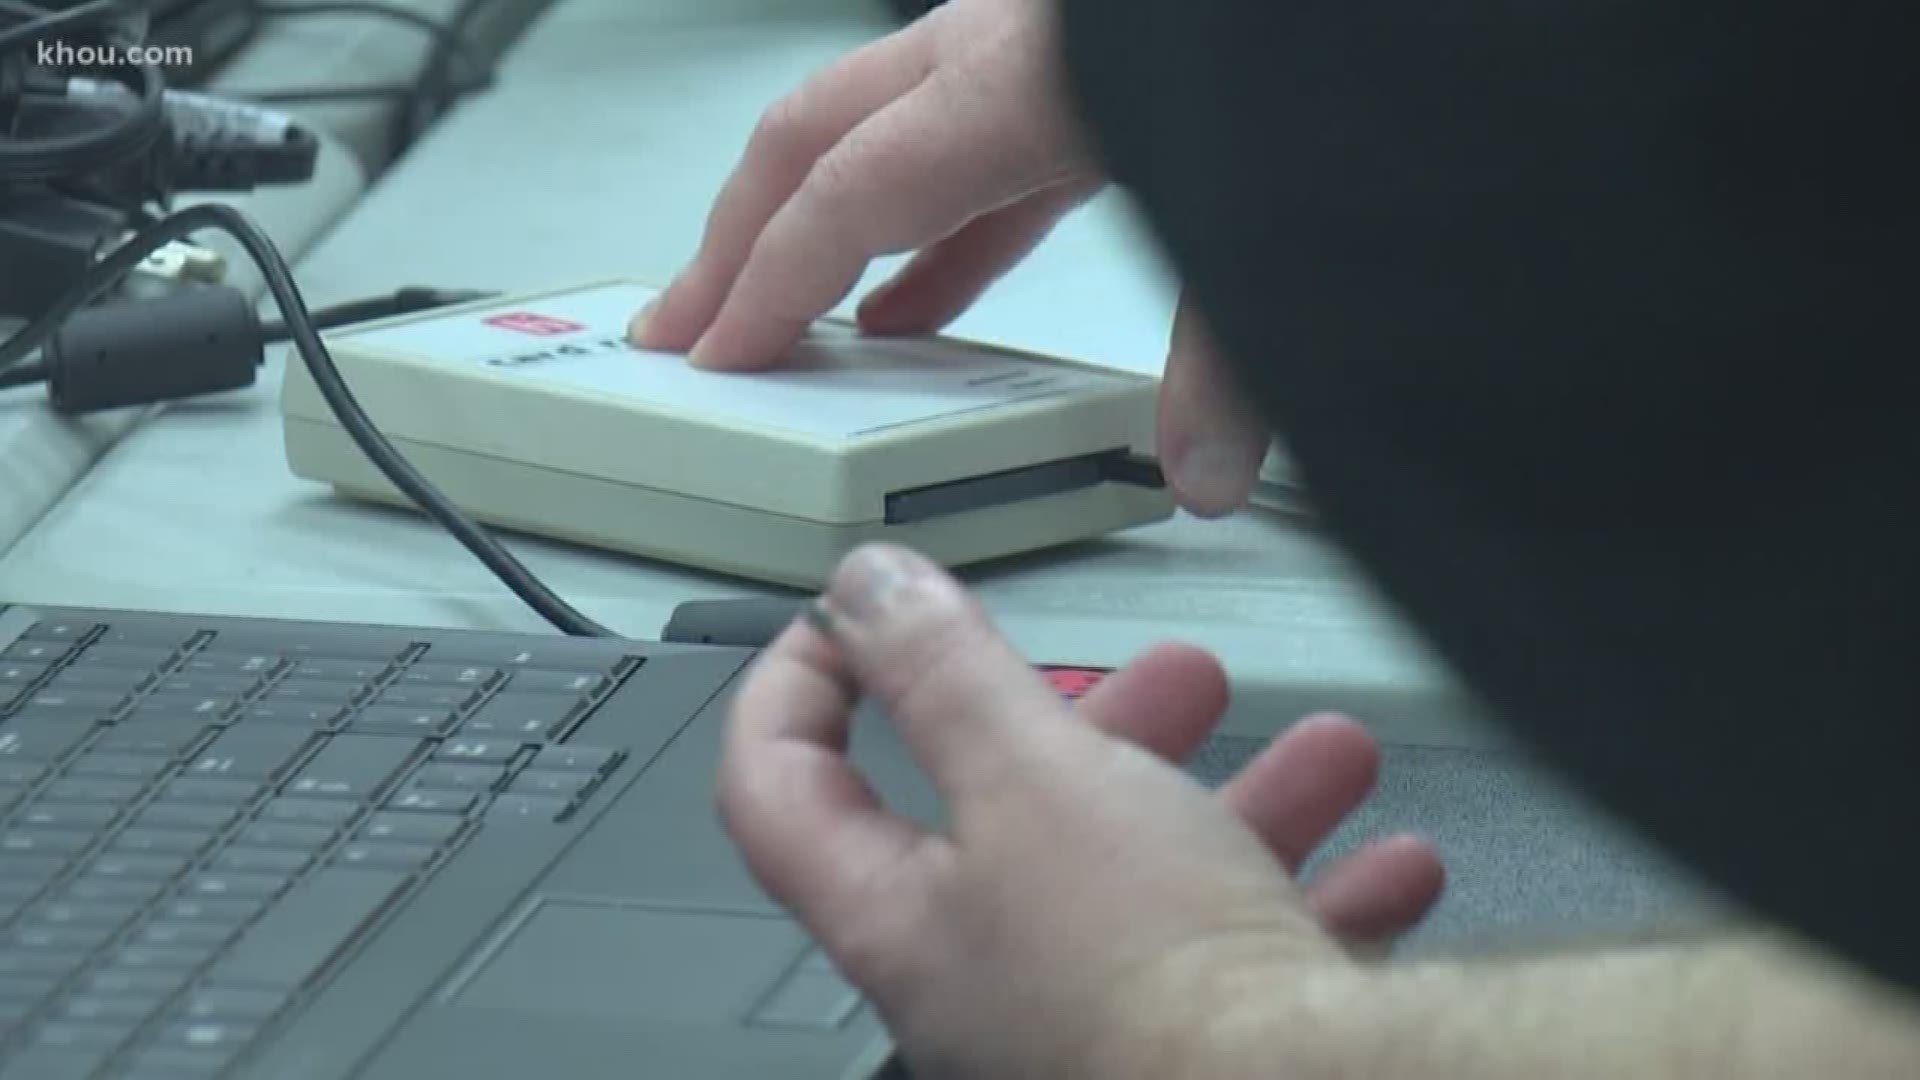 Harris County is using a new system to tally votes during the Texas primary.